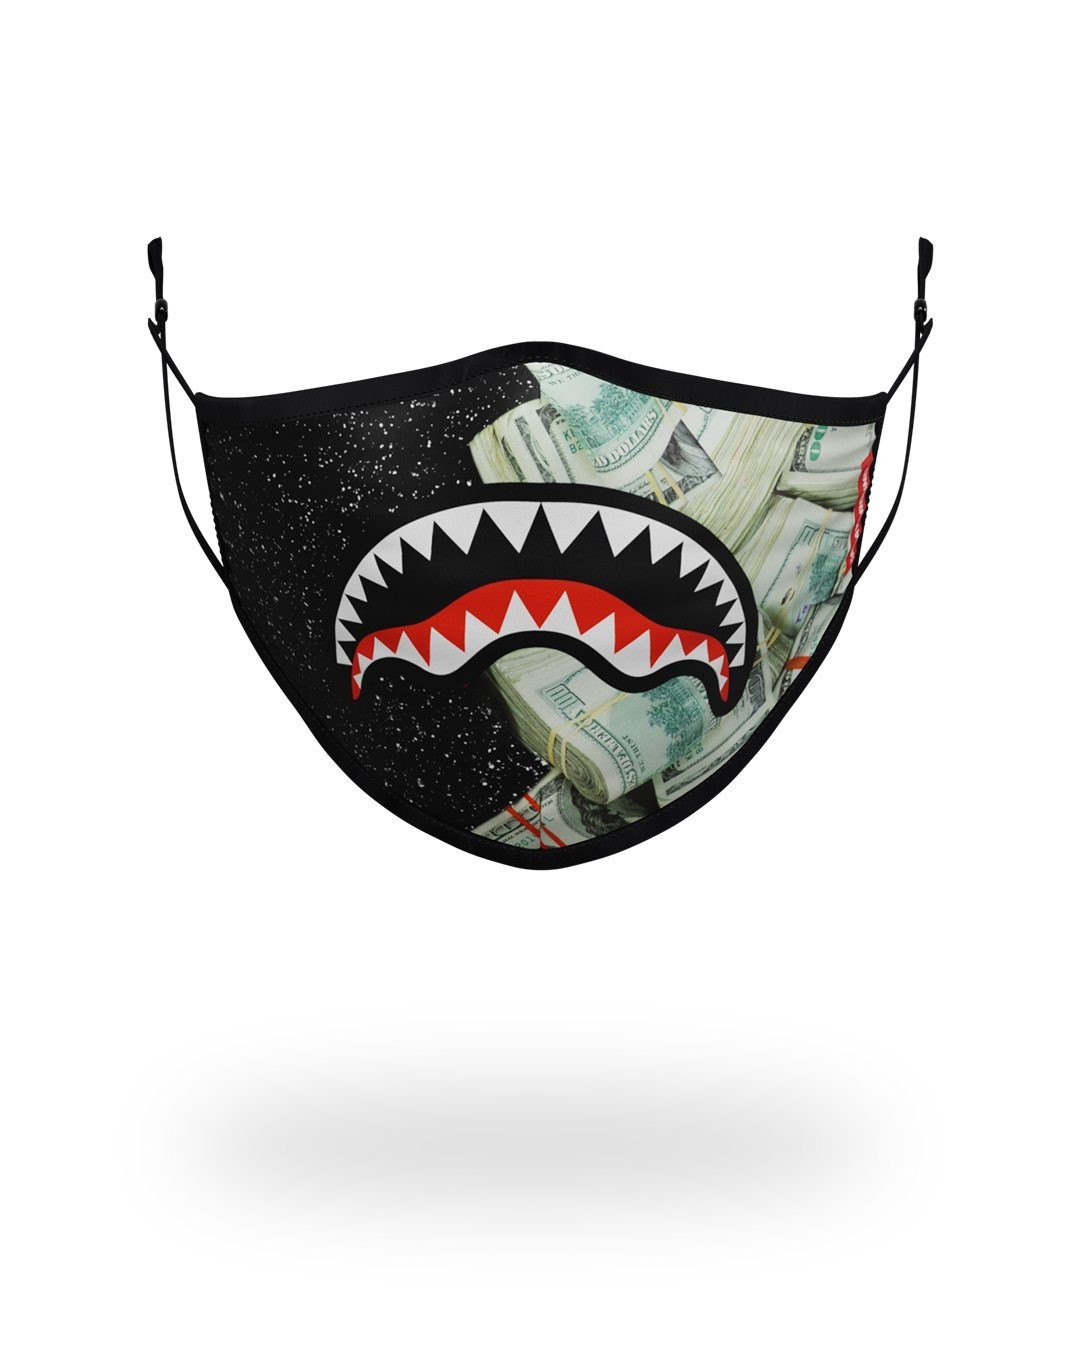 HOT SALE ☆☆☆ ADULT PARTY SHARK FORM FITTING FACE MASK - HOT SALE ☆☆☆ ADULT PARTY SHARK FORM FITTING FACE MASK-31